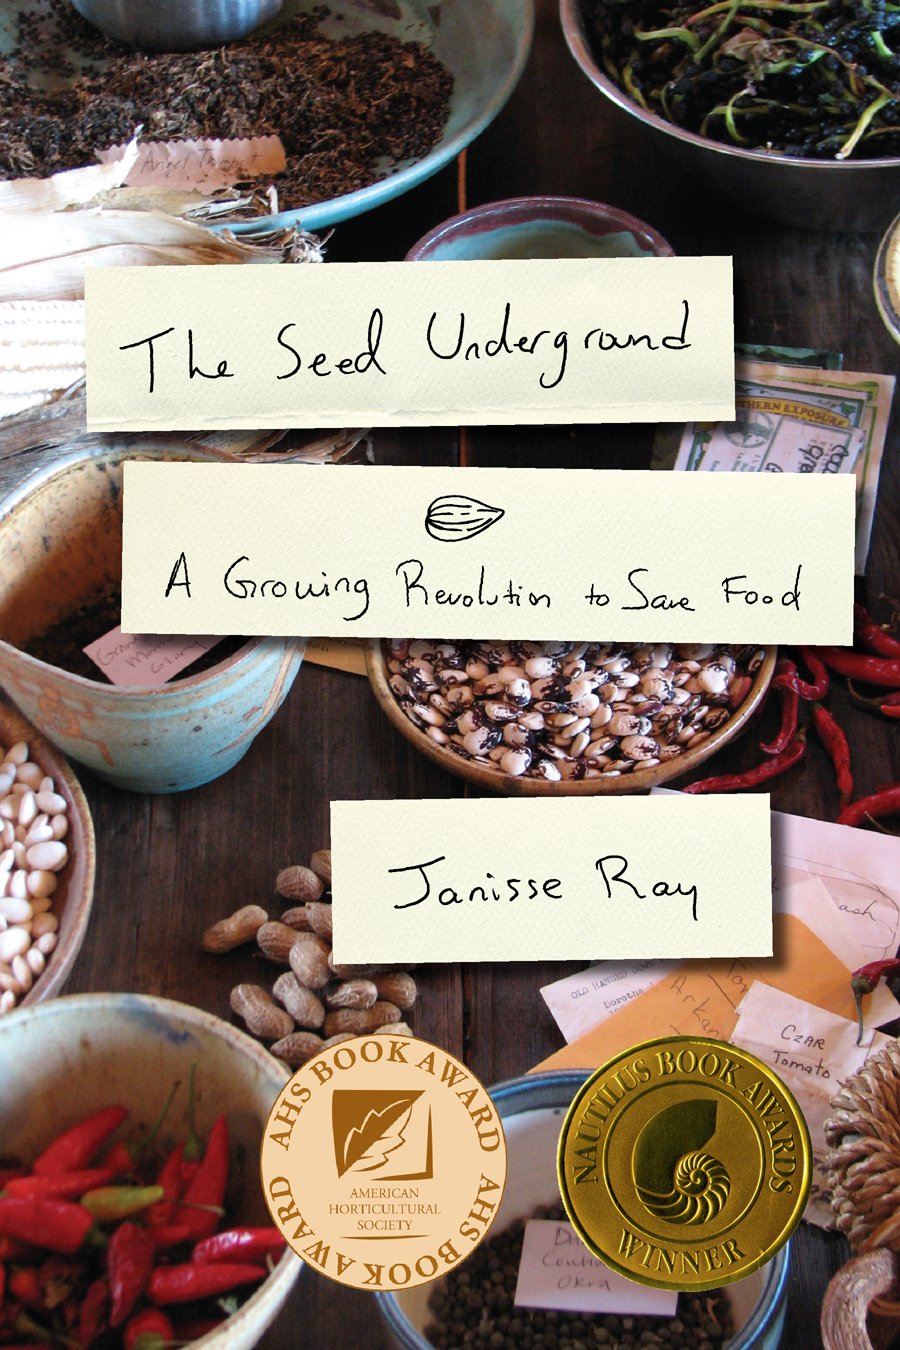 book cover of The Seed Underground